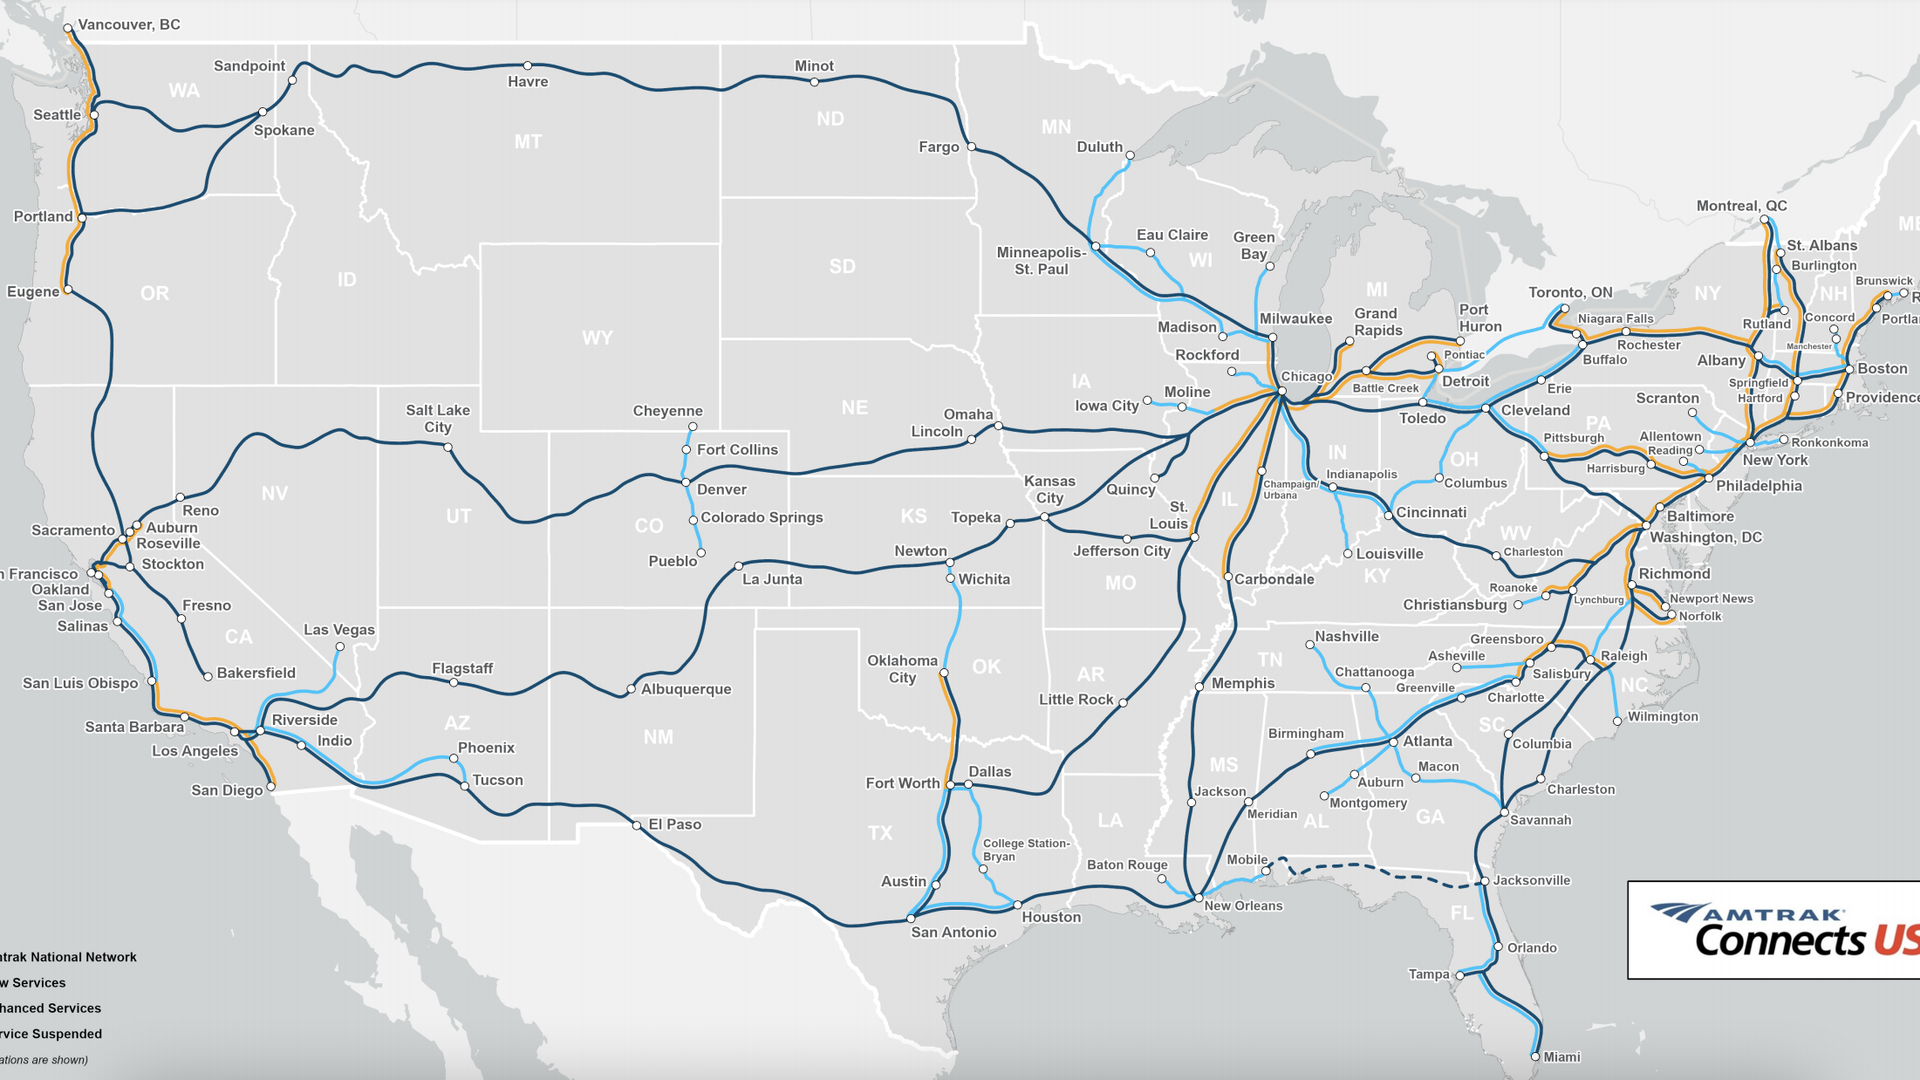 The proposed map for an expanded rail service by Amtrak.